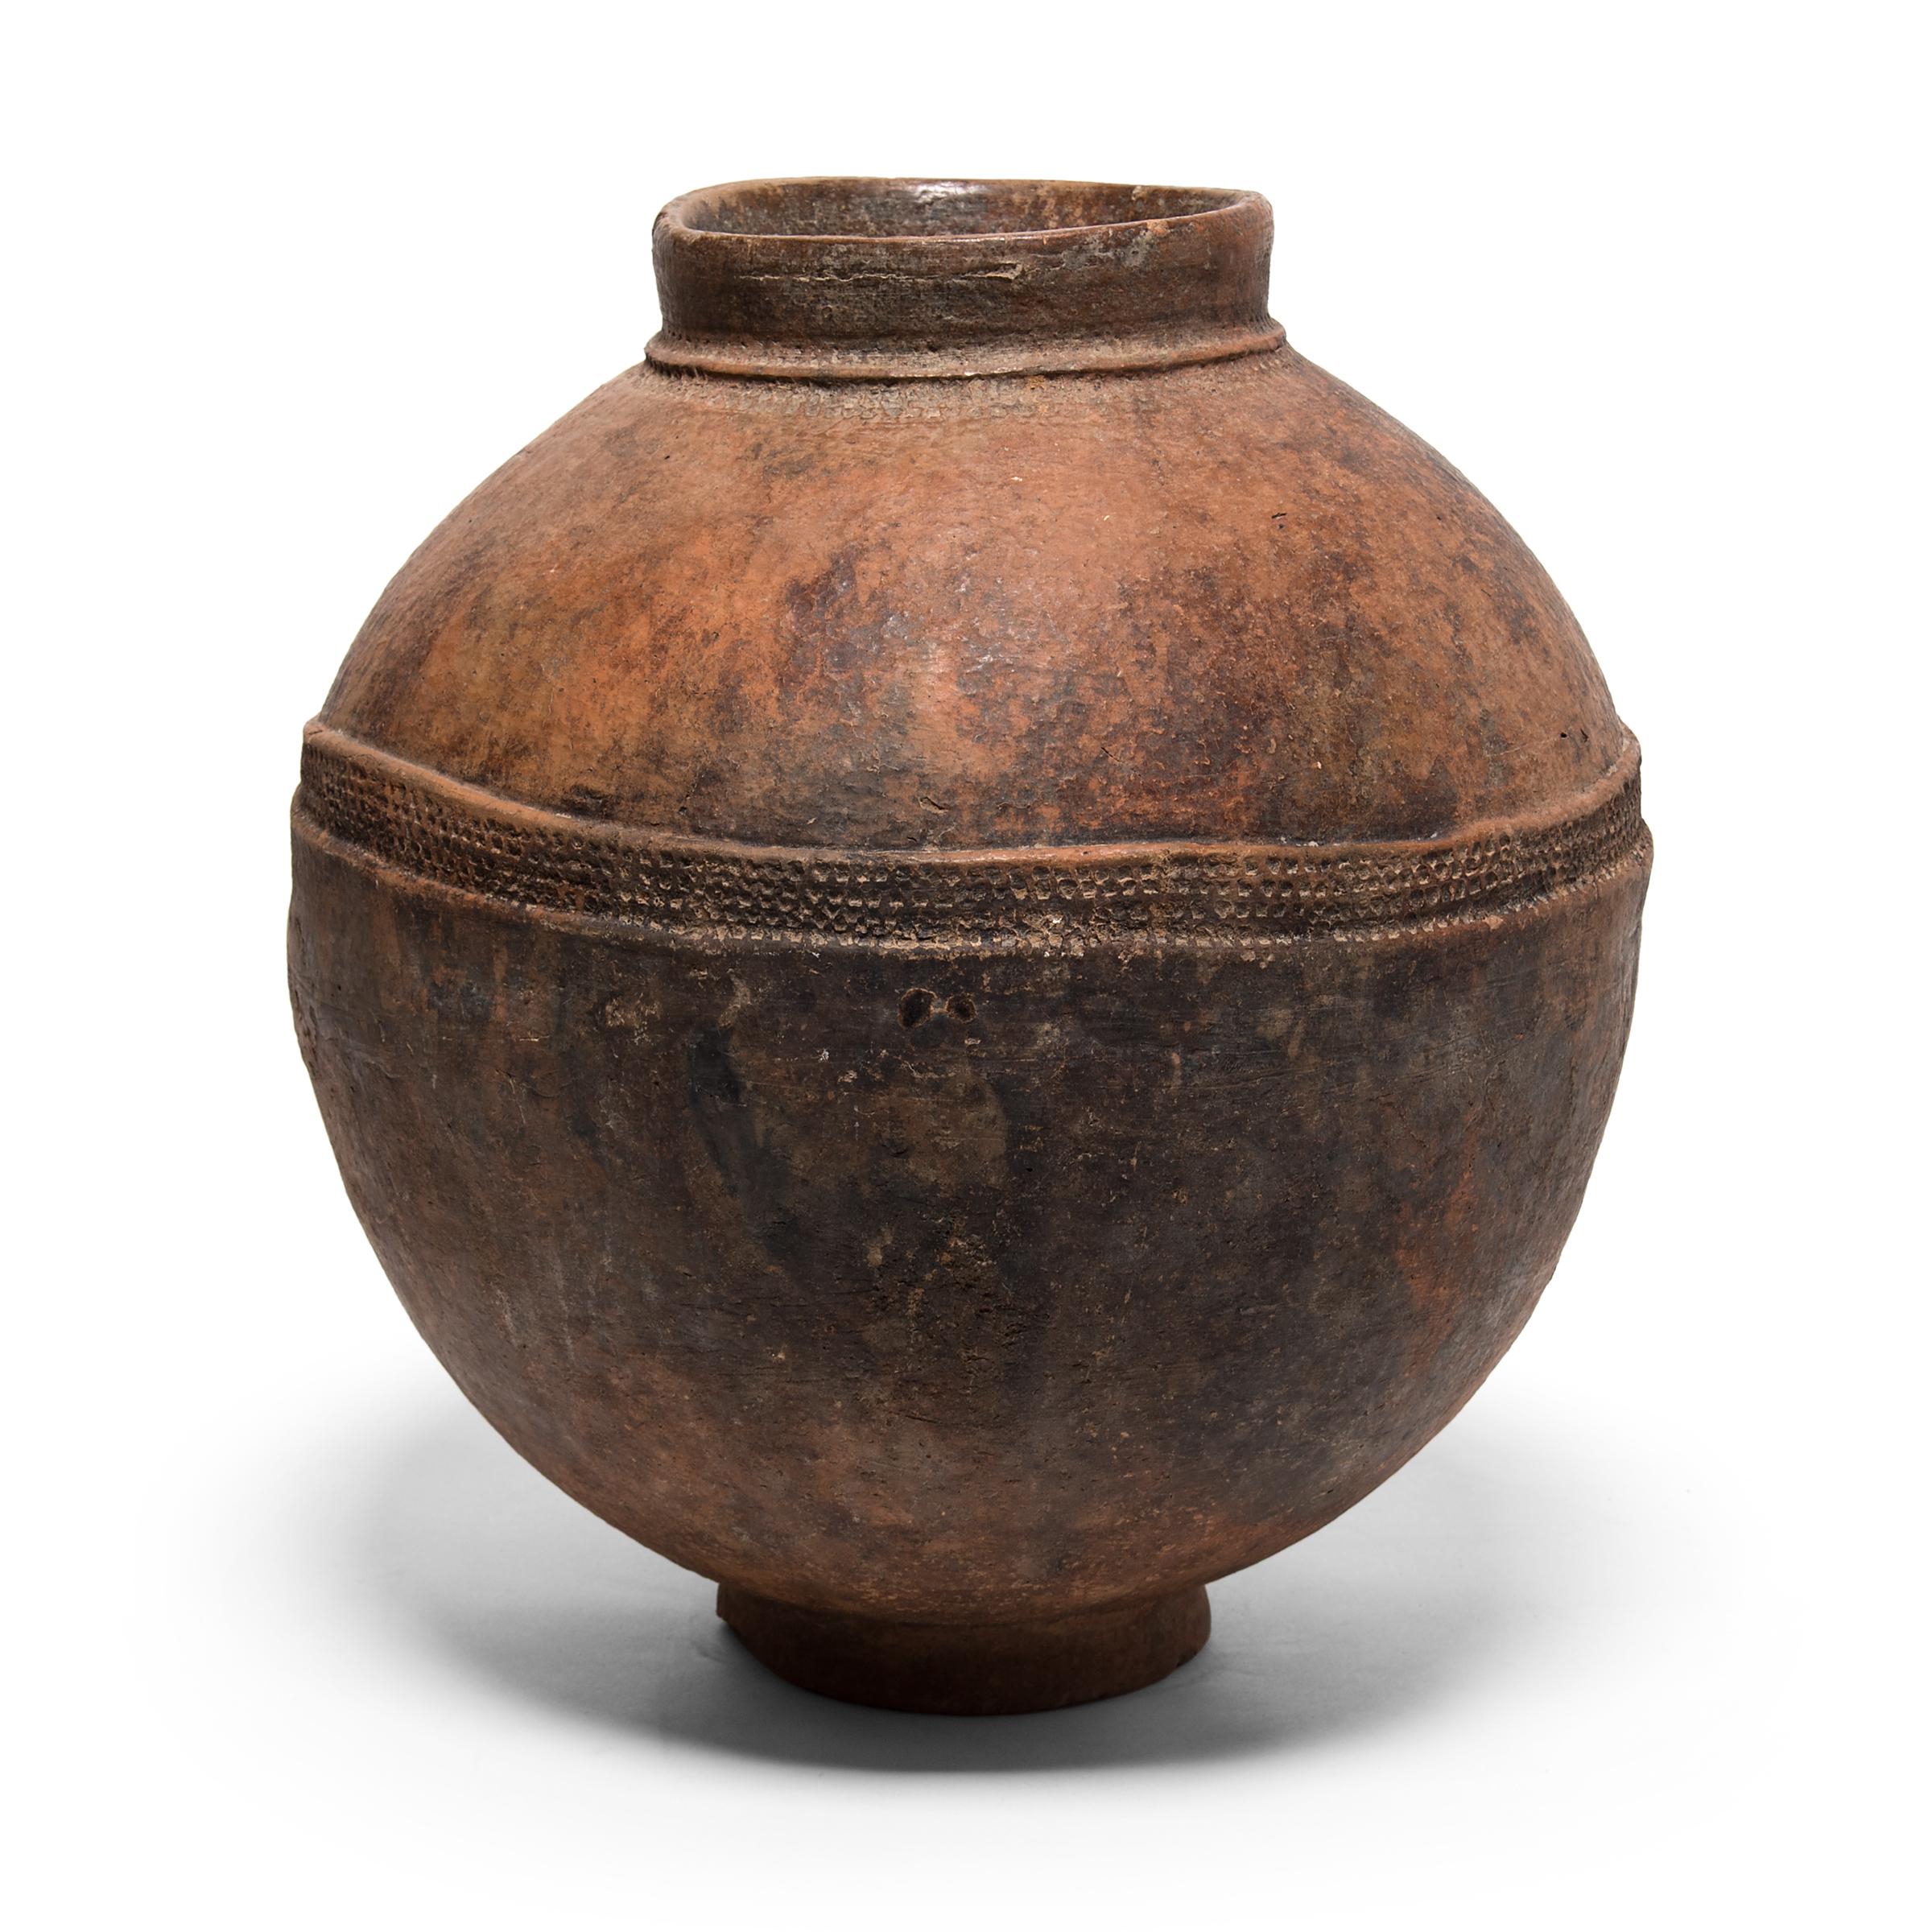 Formed by pounding flattened clay around a convex mold, this well-proportioned vessel is a water storage vessel known as a jidaga, created by women of the Bambara people of Mali. Although the vessel's small mouth is uncommon for a water jar, the